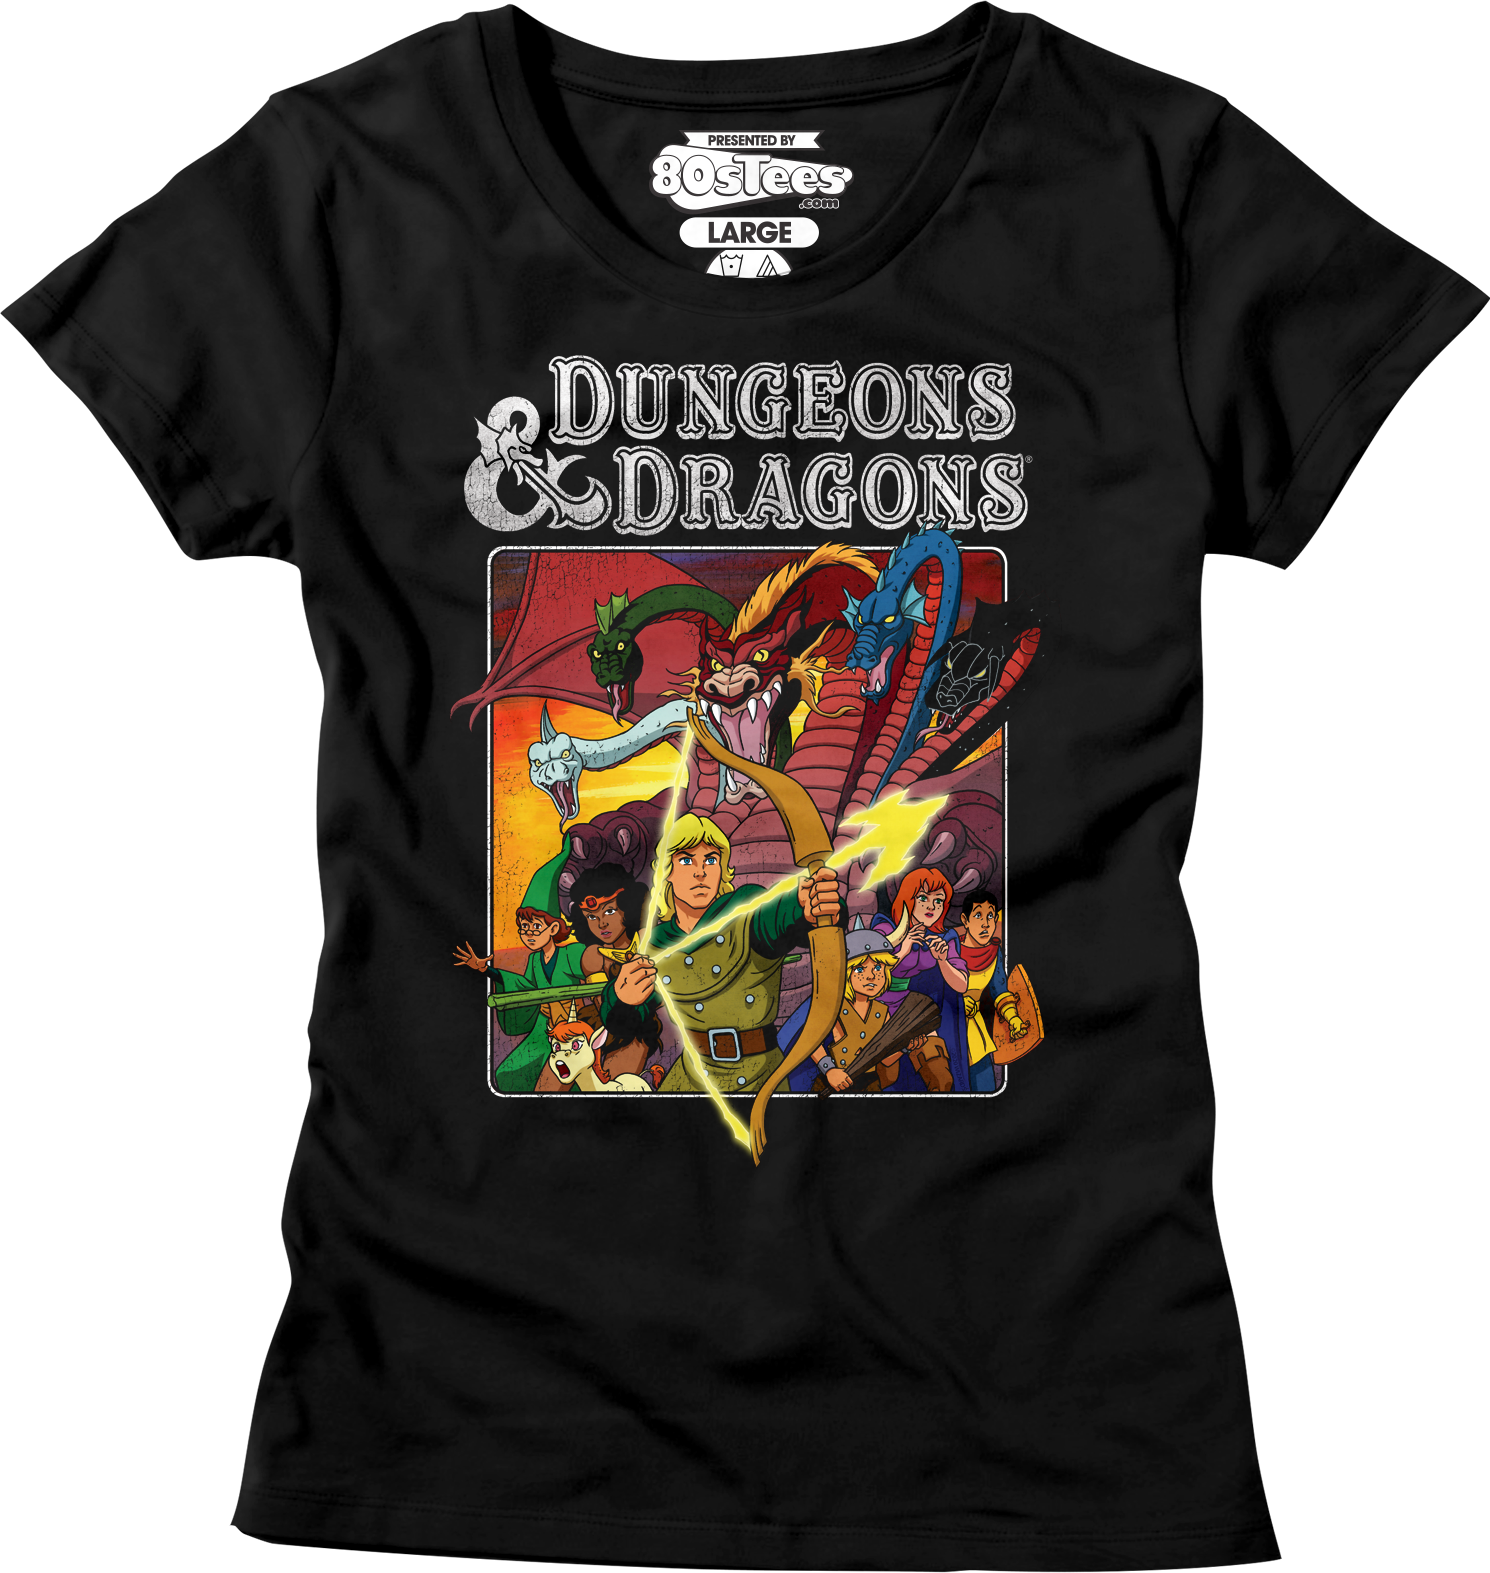 anime where the main character used to wear a dragon shirt in middle school til he got rejected